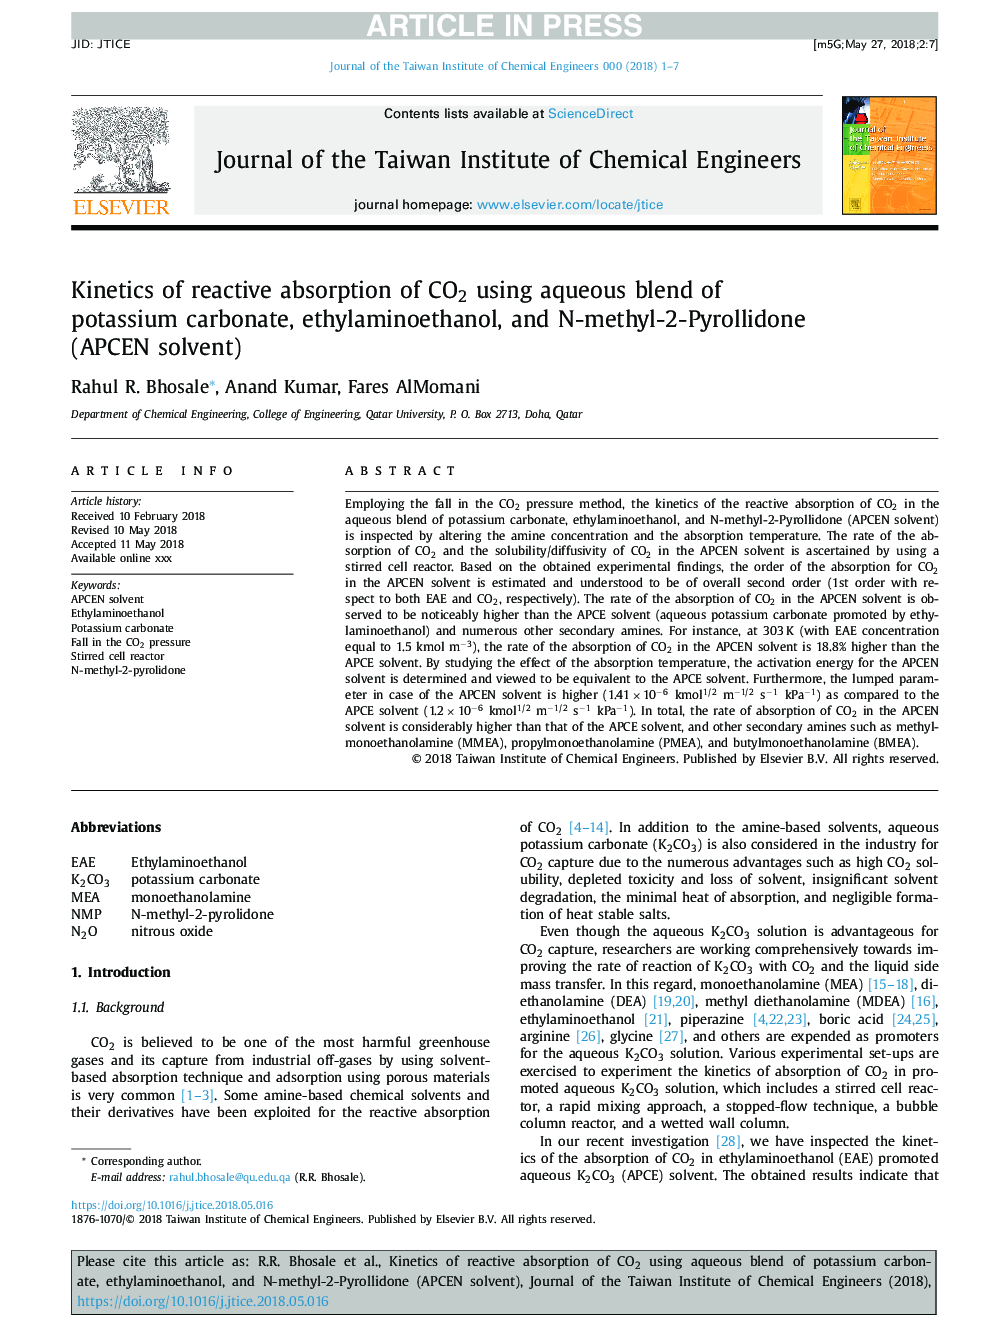 Kinetics of reactive absorption of CO2 using aqueous blend of potassium carbonate, ethylaminoethanol, and N-methyl-2-Pyrollidone (APCEN solvent)